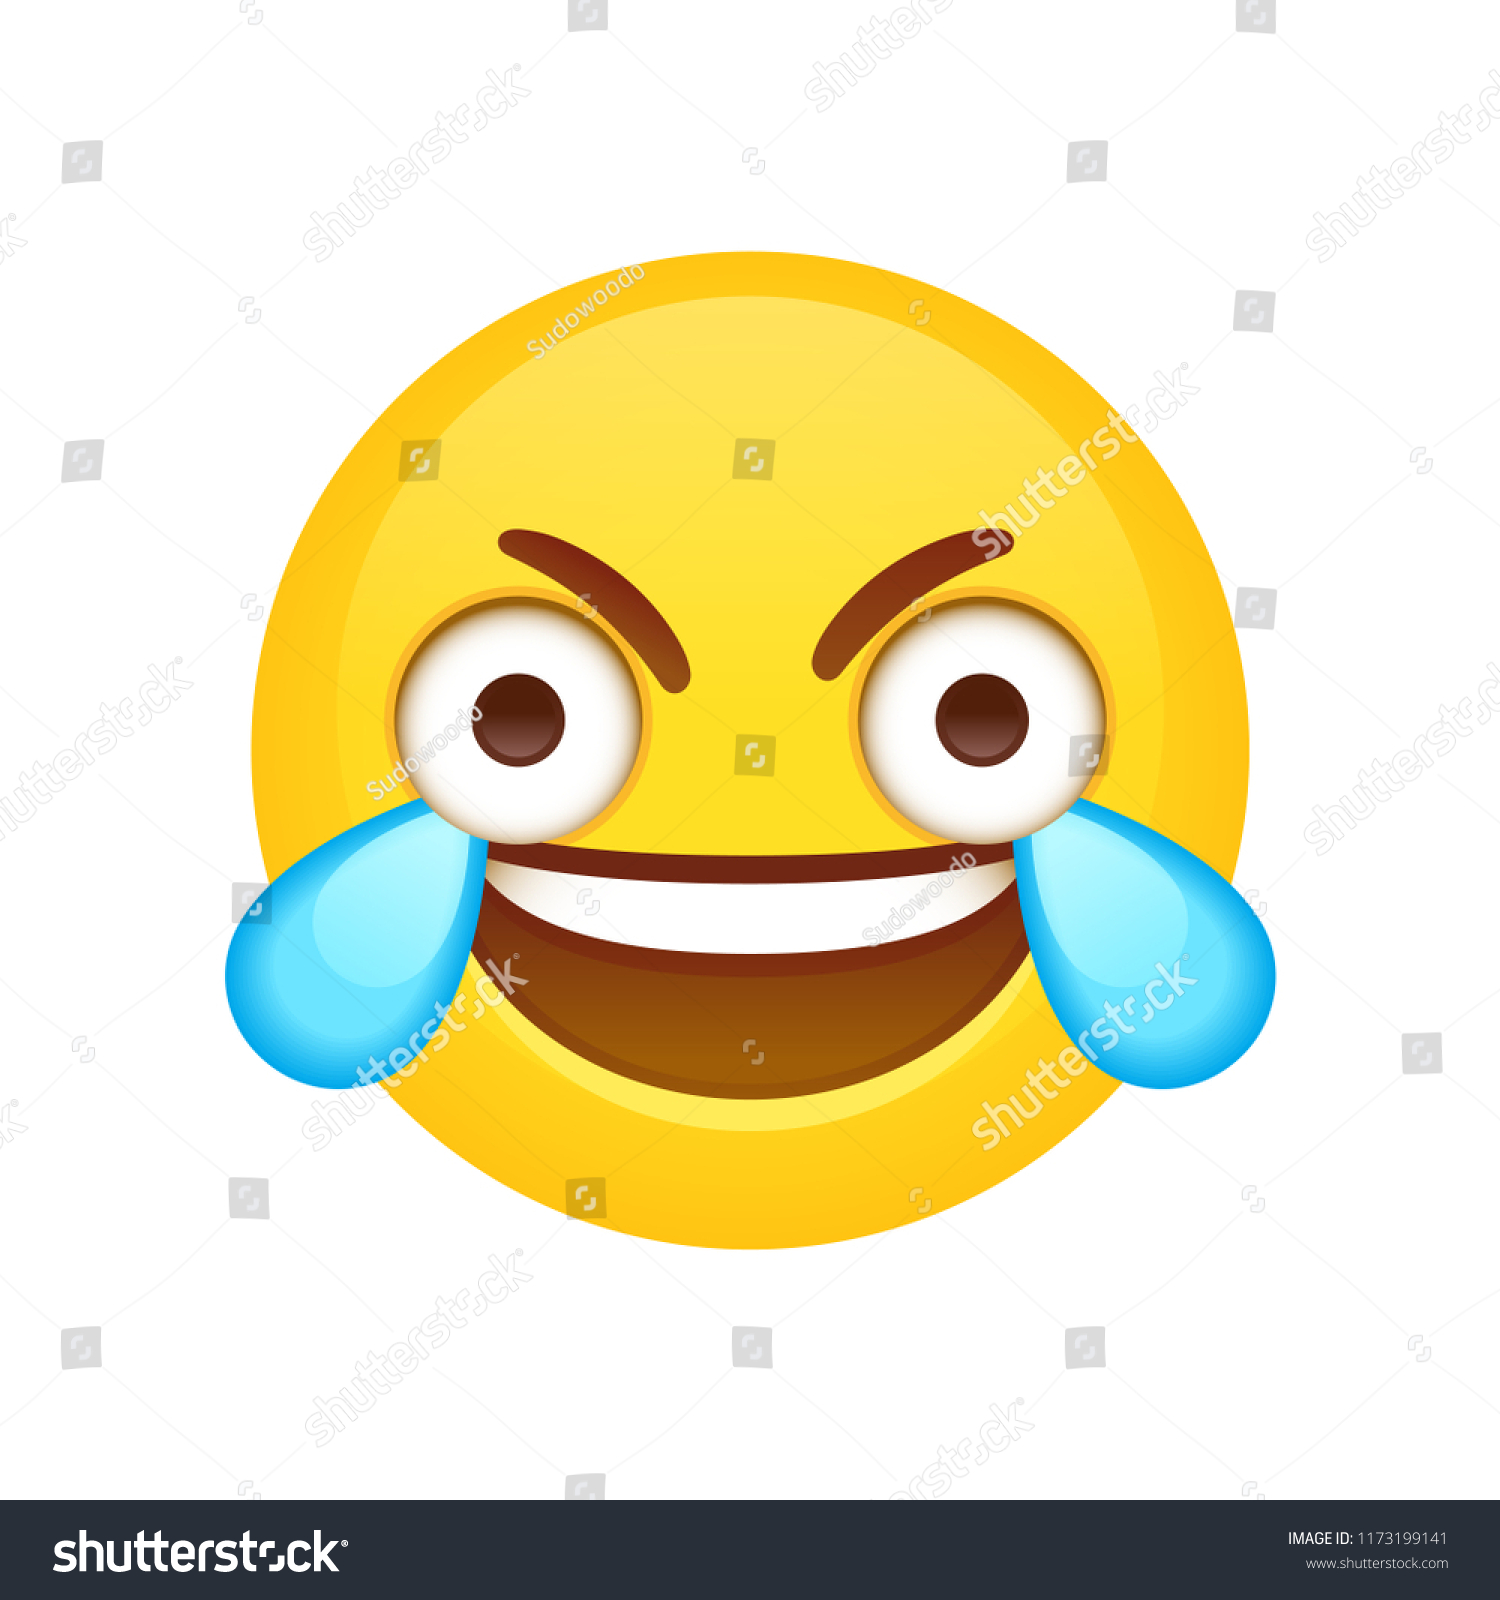 Open Eye Crying Laughing Emoji Funny Stock Vector Royalty Free